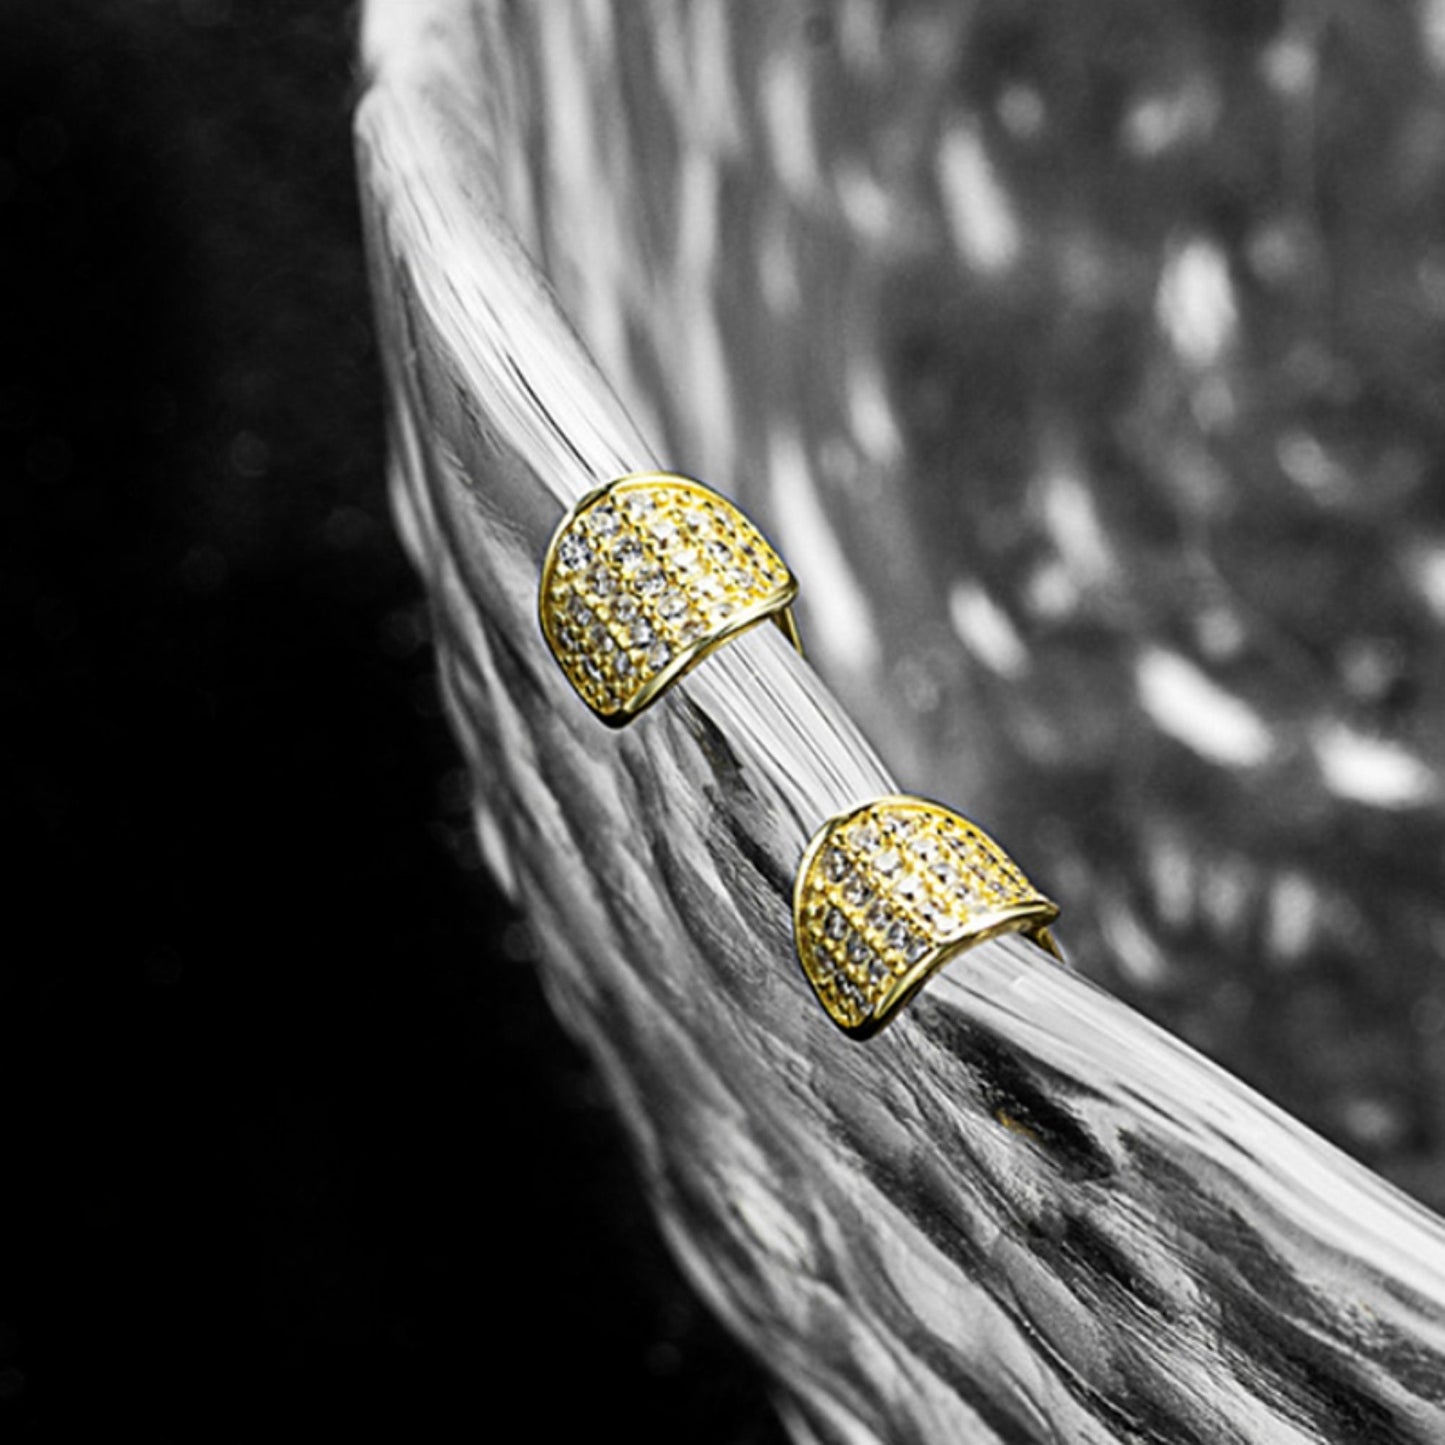 Pave CZ Gold Stud Earrings with Curvy Hoops on sterling silver